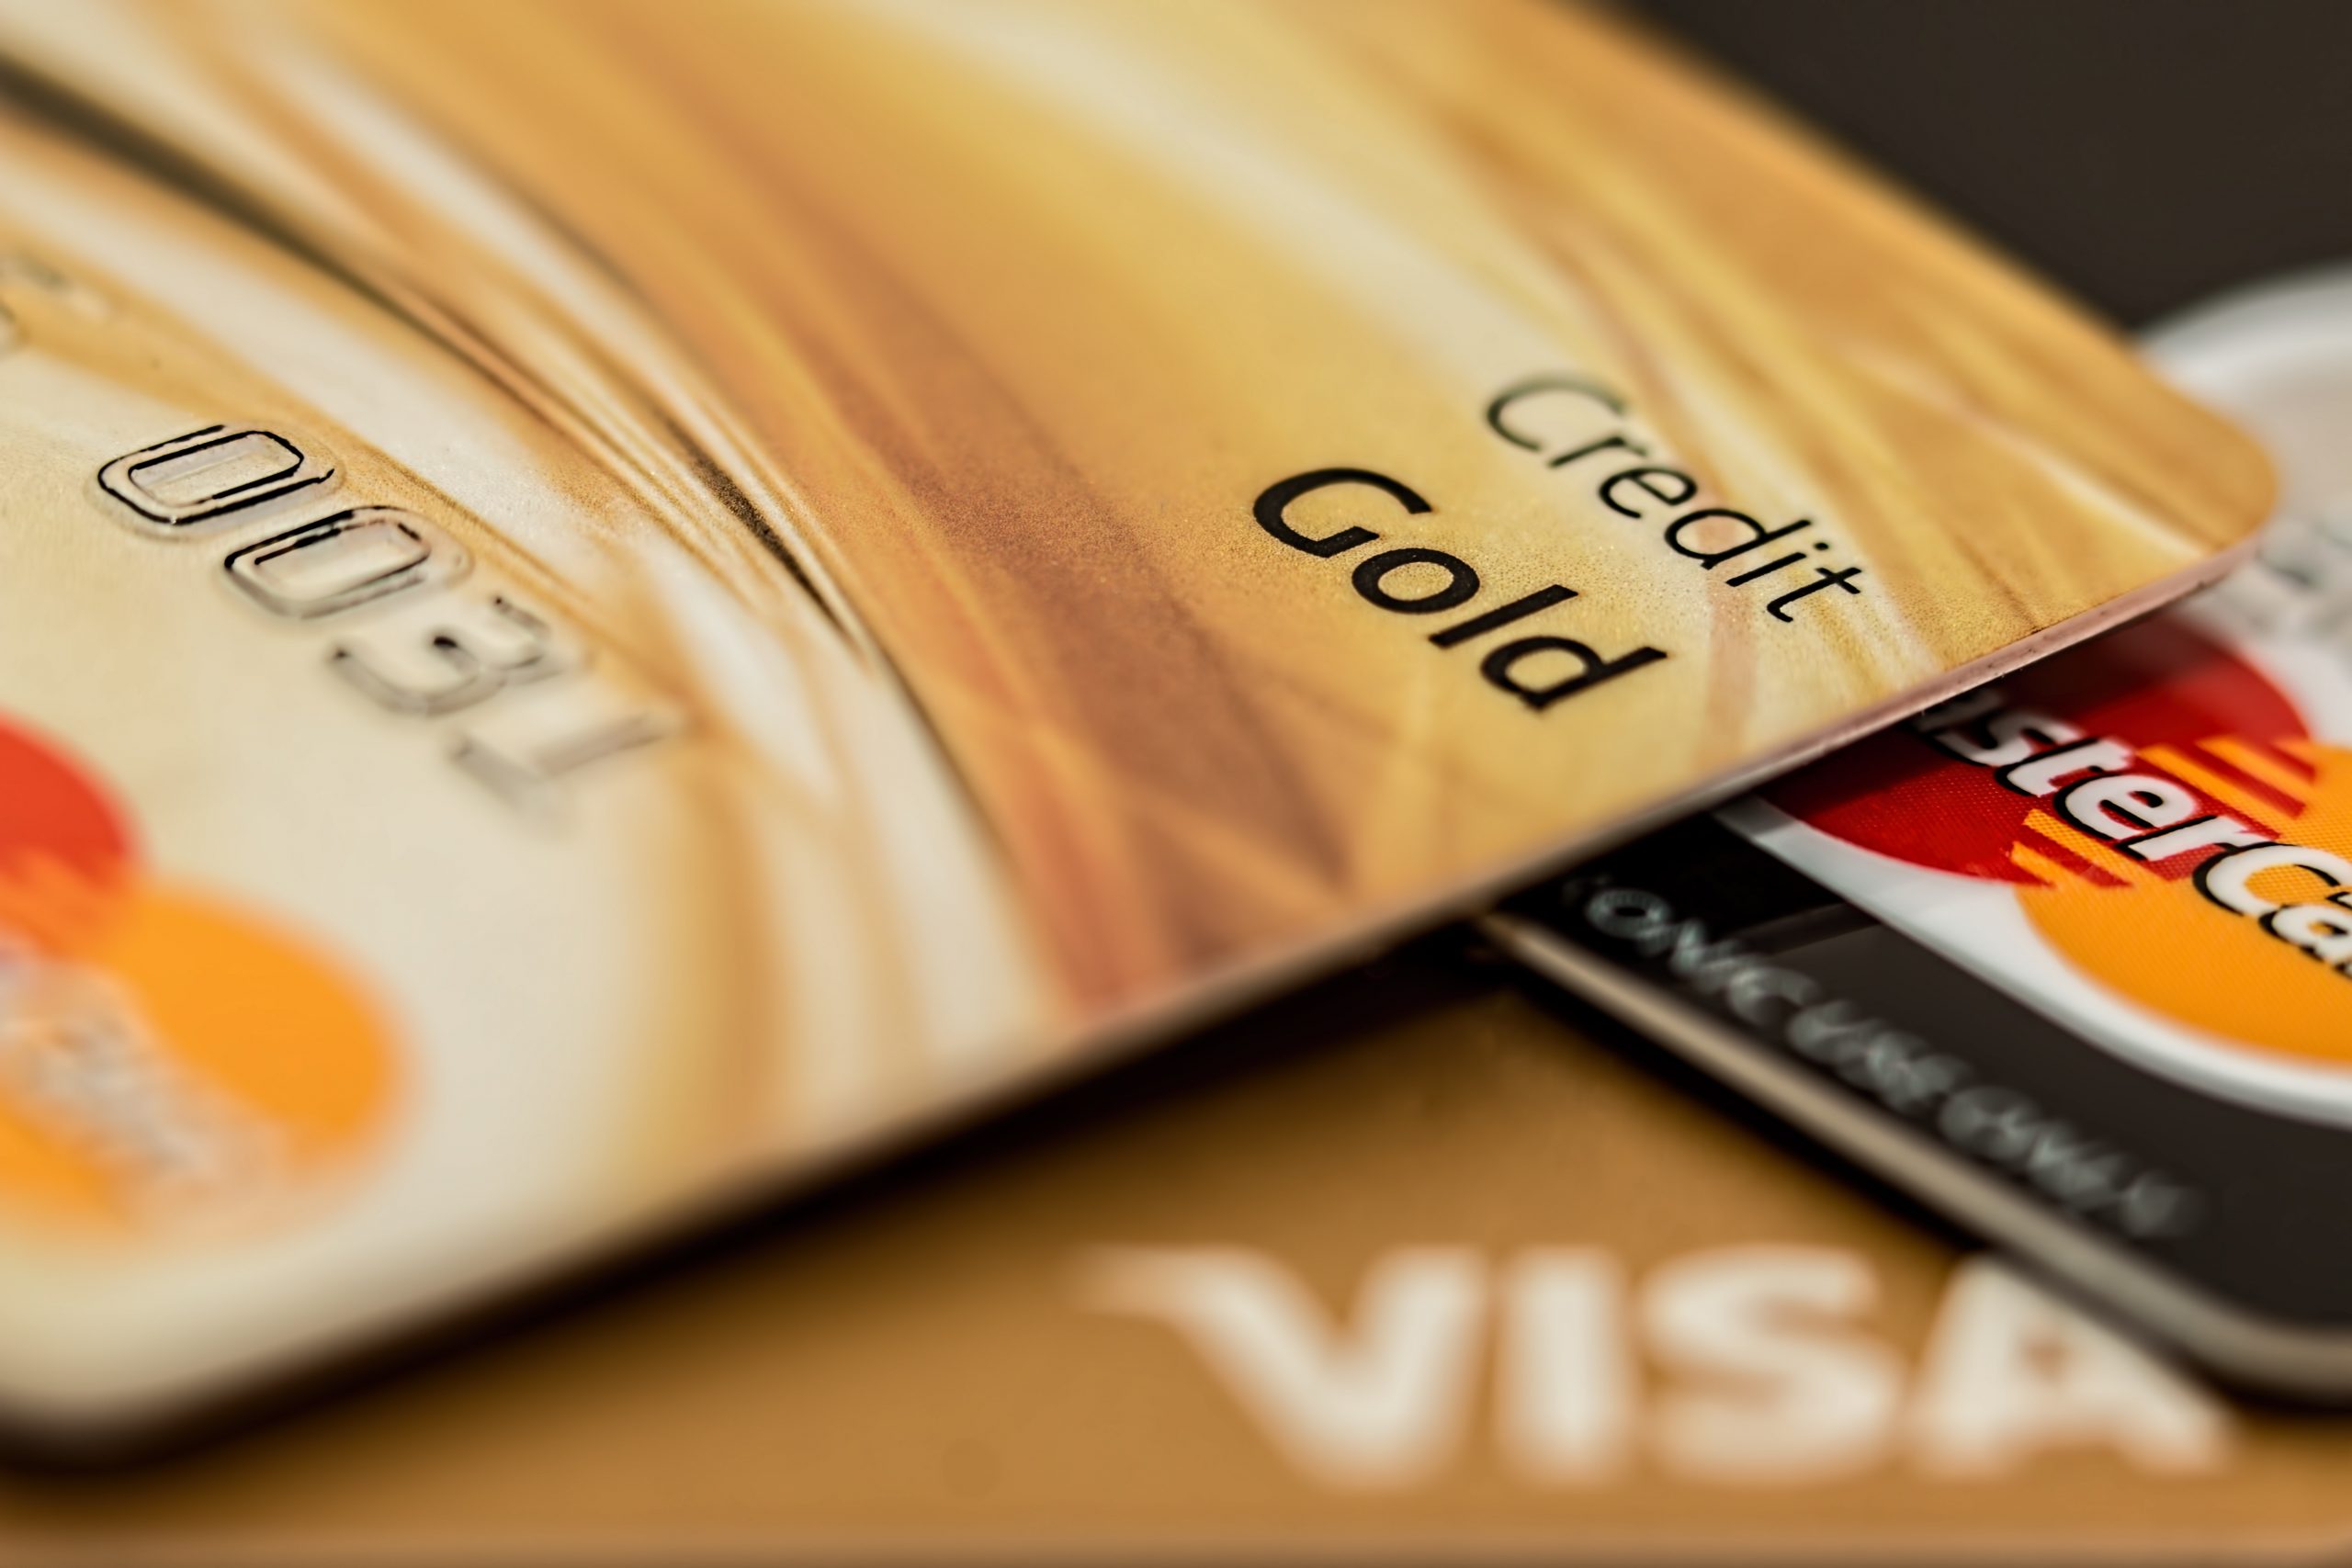 A close up image of credit cards